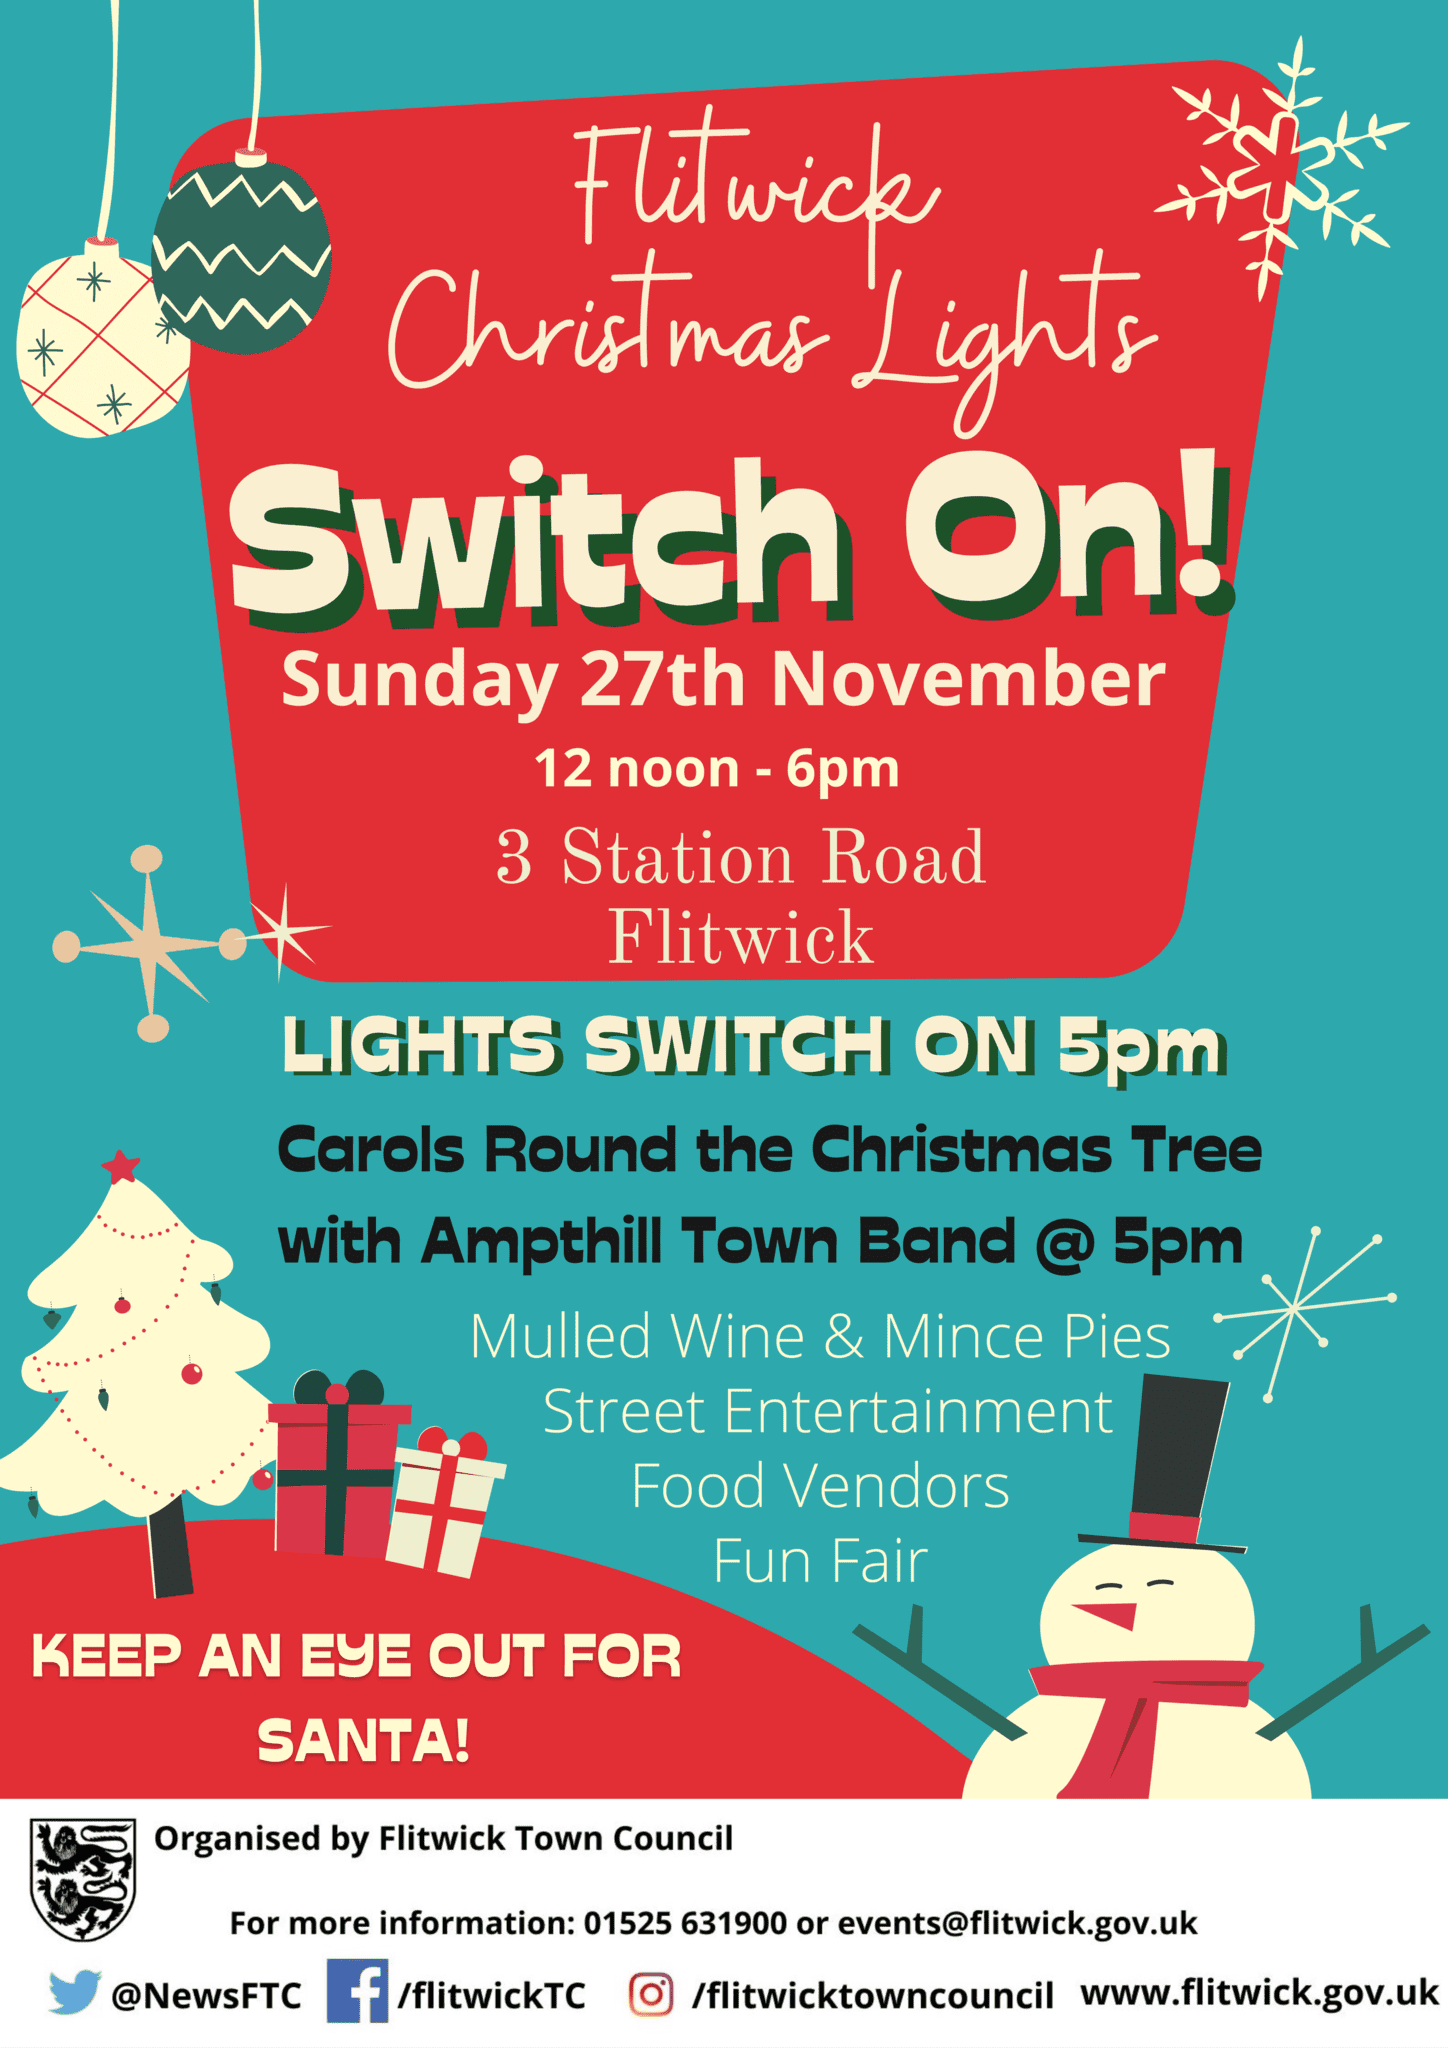 Christmas Lights Switch On!